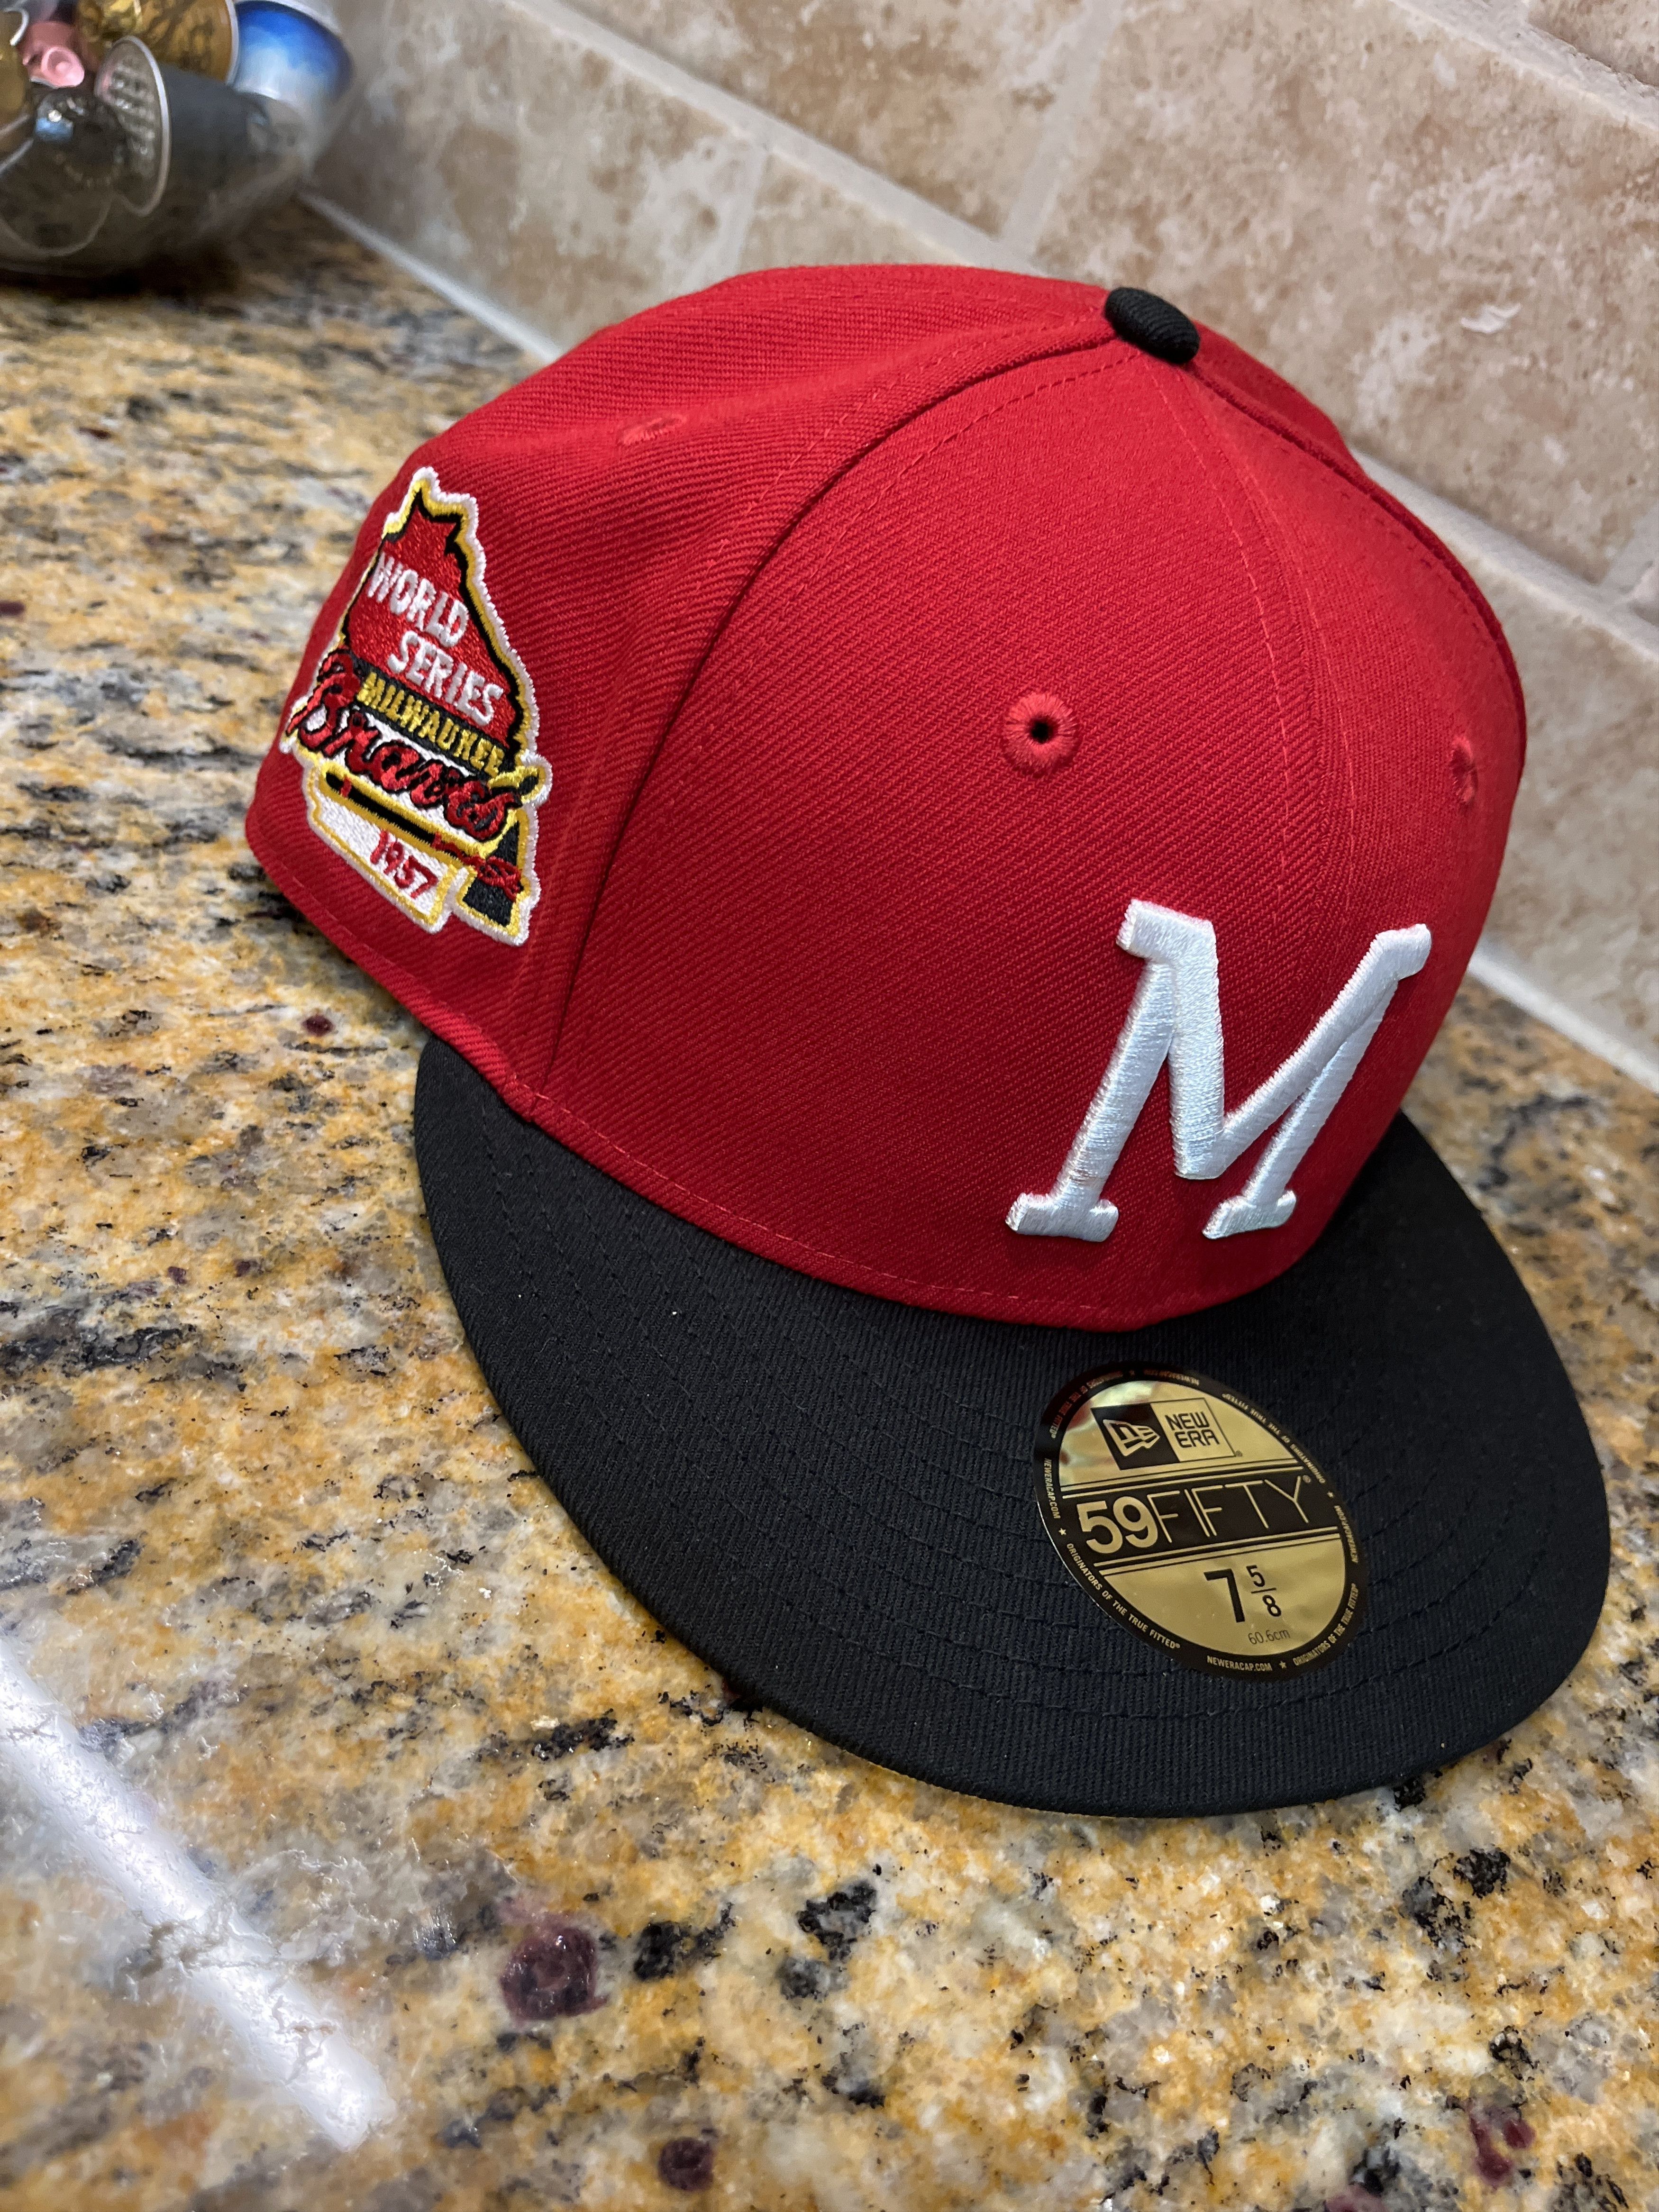 MYFITTEDS 7 5/8 Milwaukee Braves Fitted New Era ( Not Hat Club )